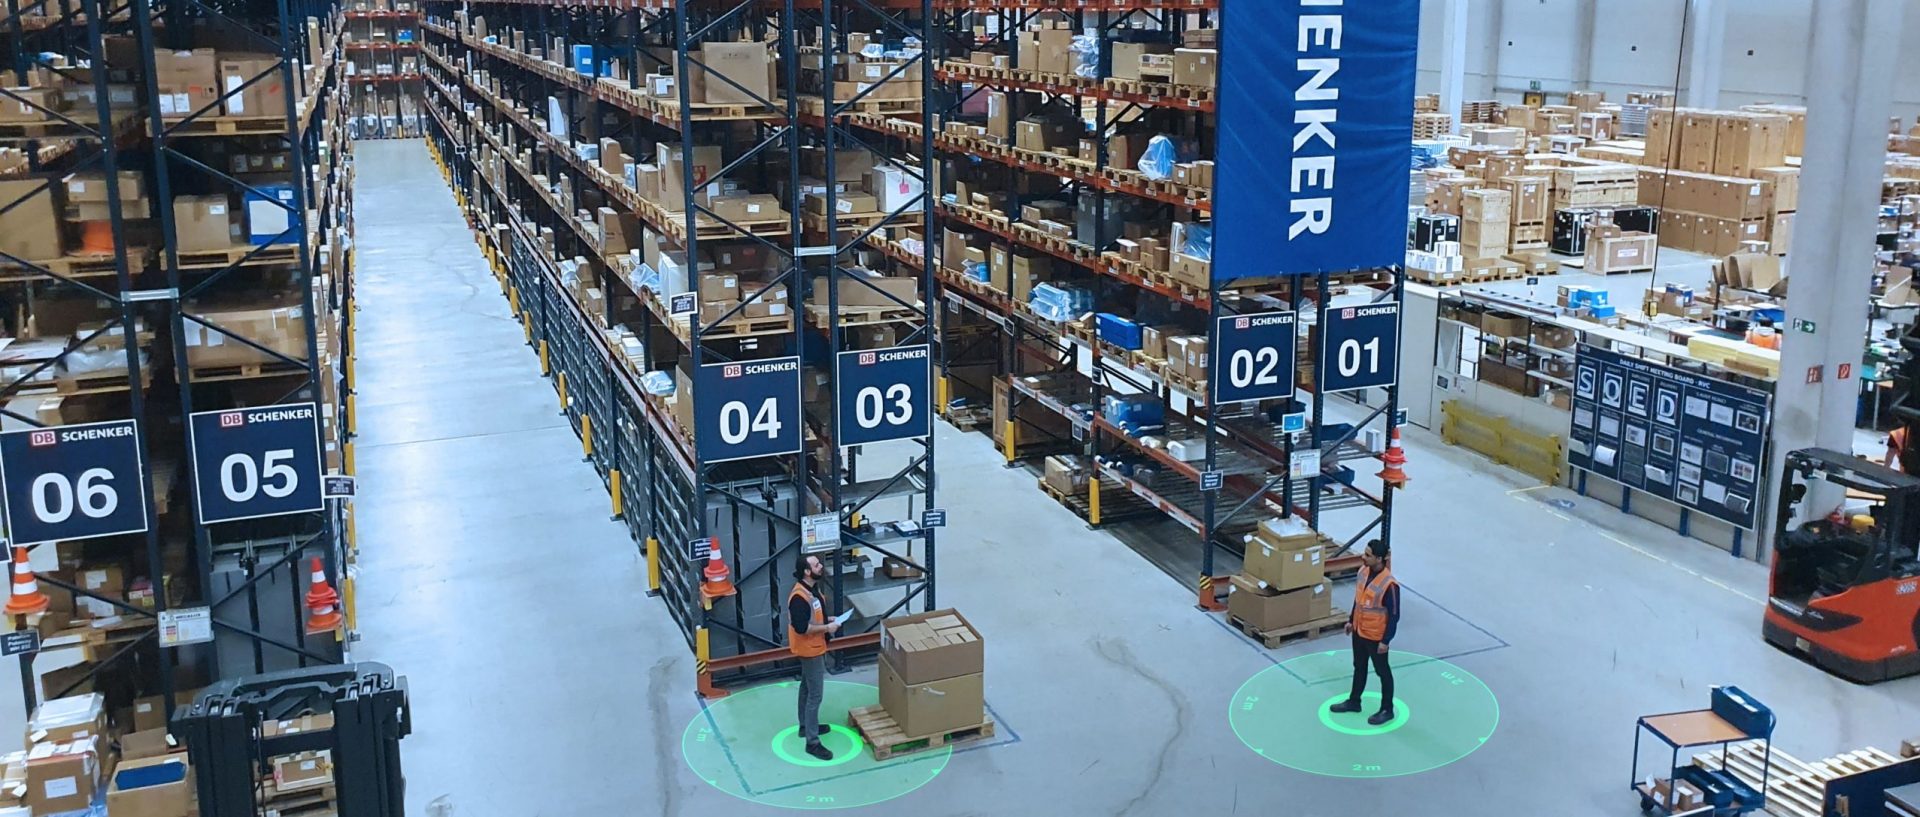 Birdseye view of employees using social distancing wearables in a warehouse